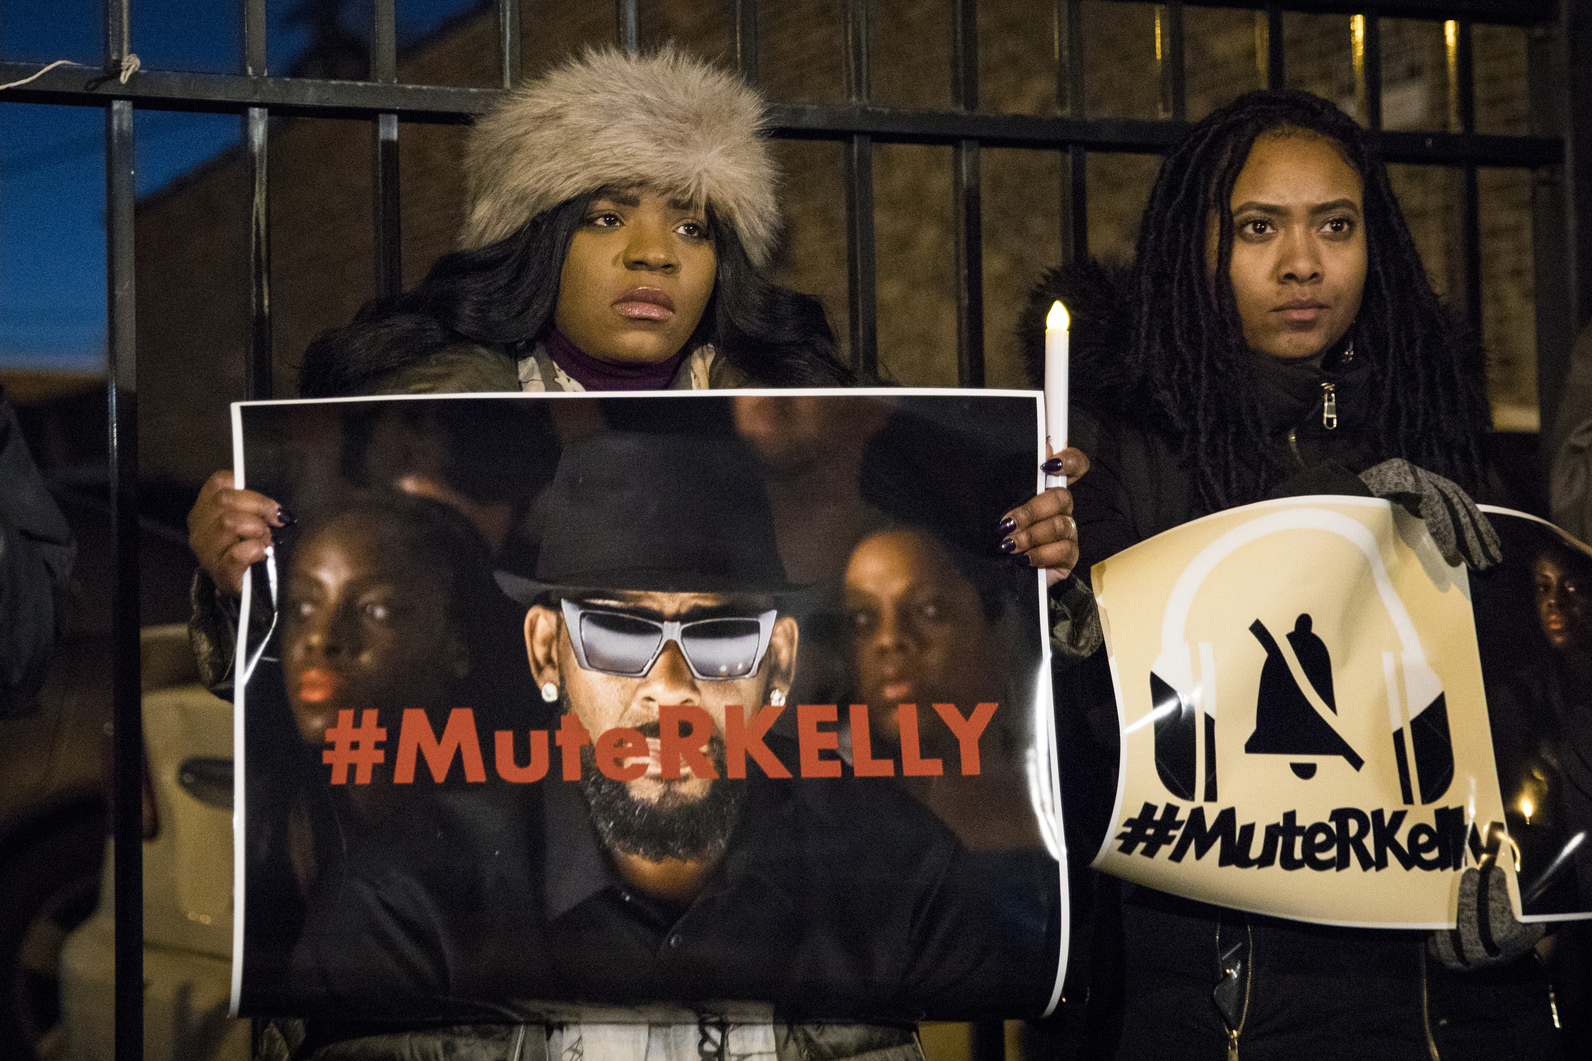 PHOTO: #MuteRKelly supporters protest outside R. Kelly's studio, Wednesday, Jan. 9, 2019 in Chicago. Lifetime's "Surviving R. Kelly" series which aired earlier this month, looks at the singer's history and allegations that he has sexually abused women.